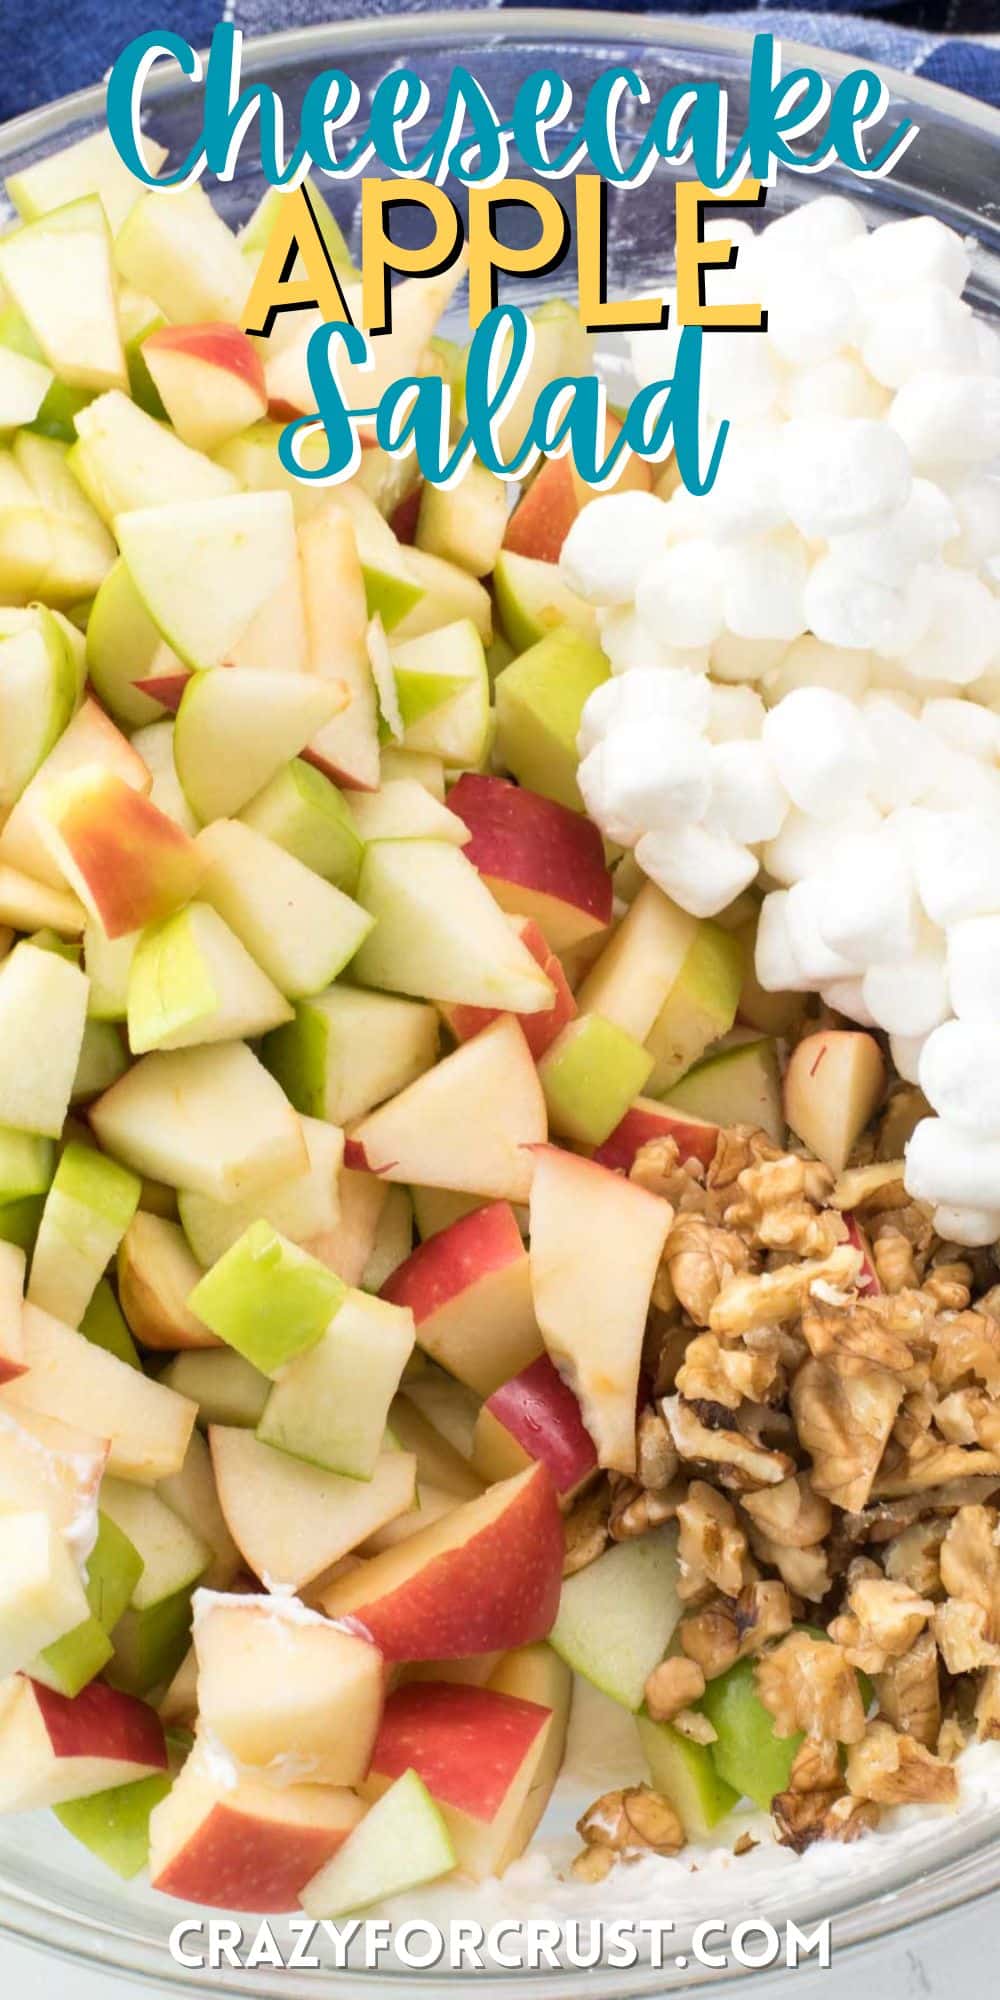 sliced apple and nuts and marshmallows separated in a bowl with words on the image.